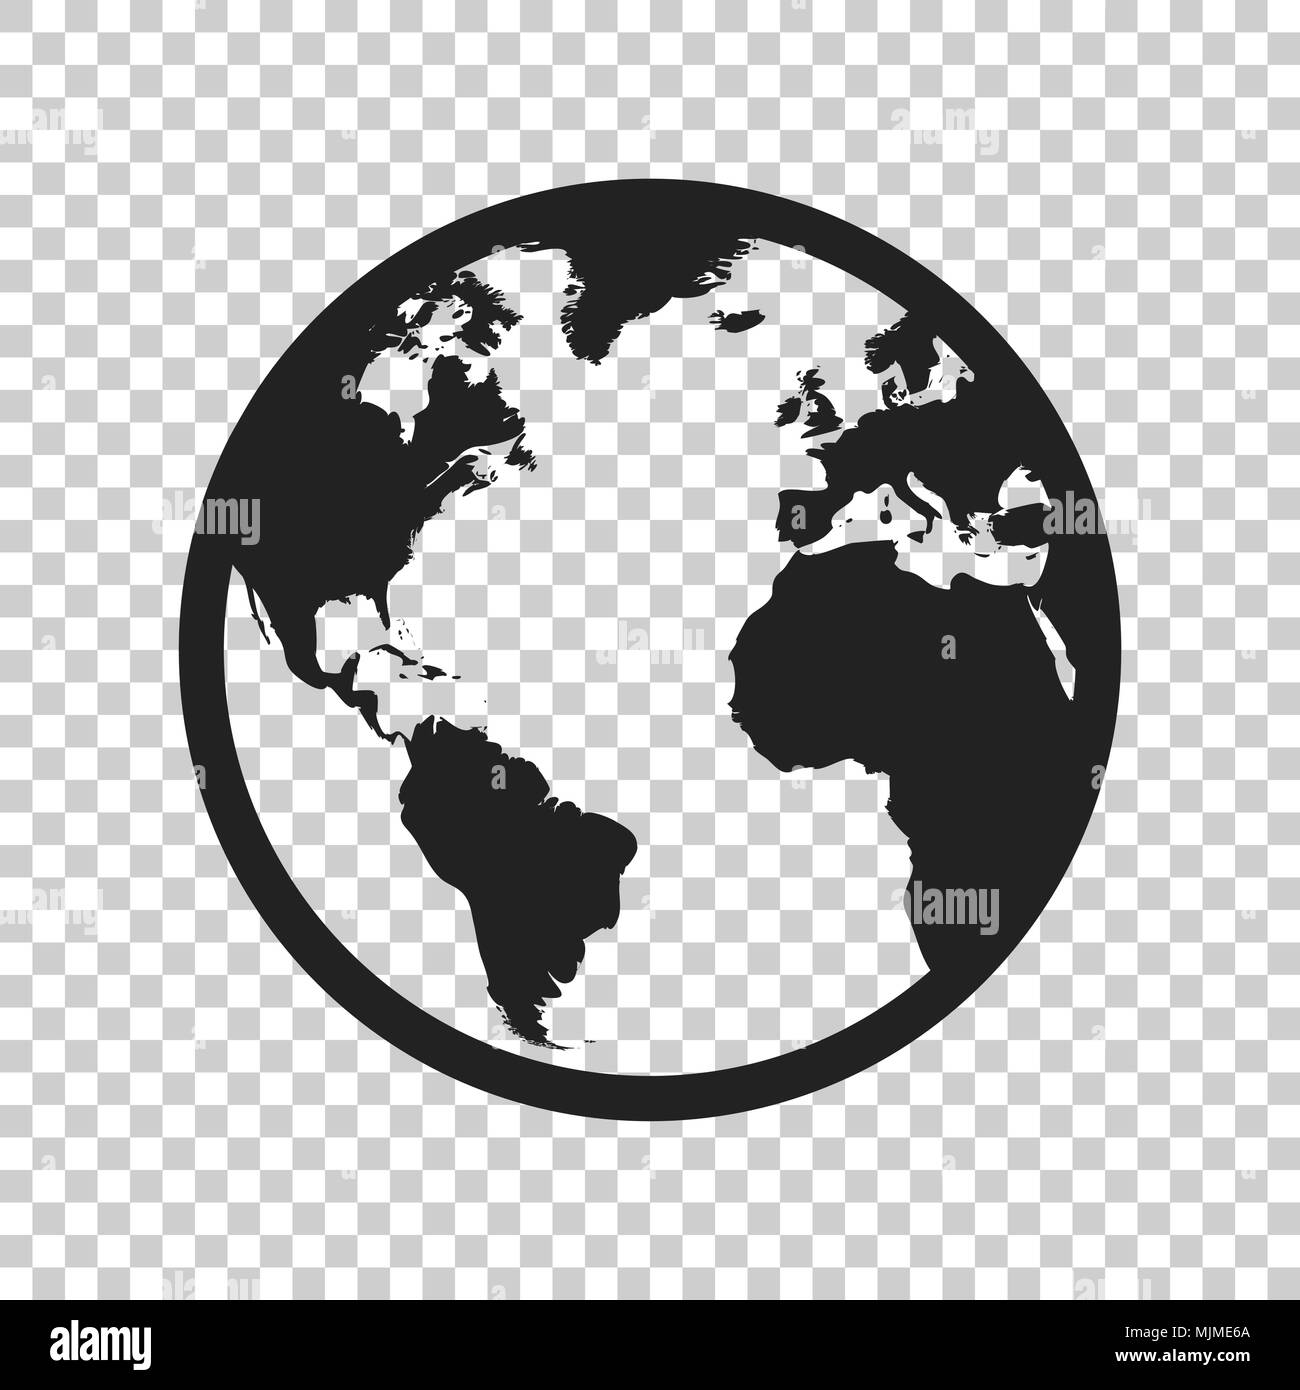 Globe world map vector icon. Round earth flat vector illustration. Planet business concept pictogram on isolated transparent background. Stock Vector